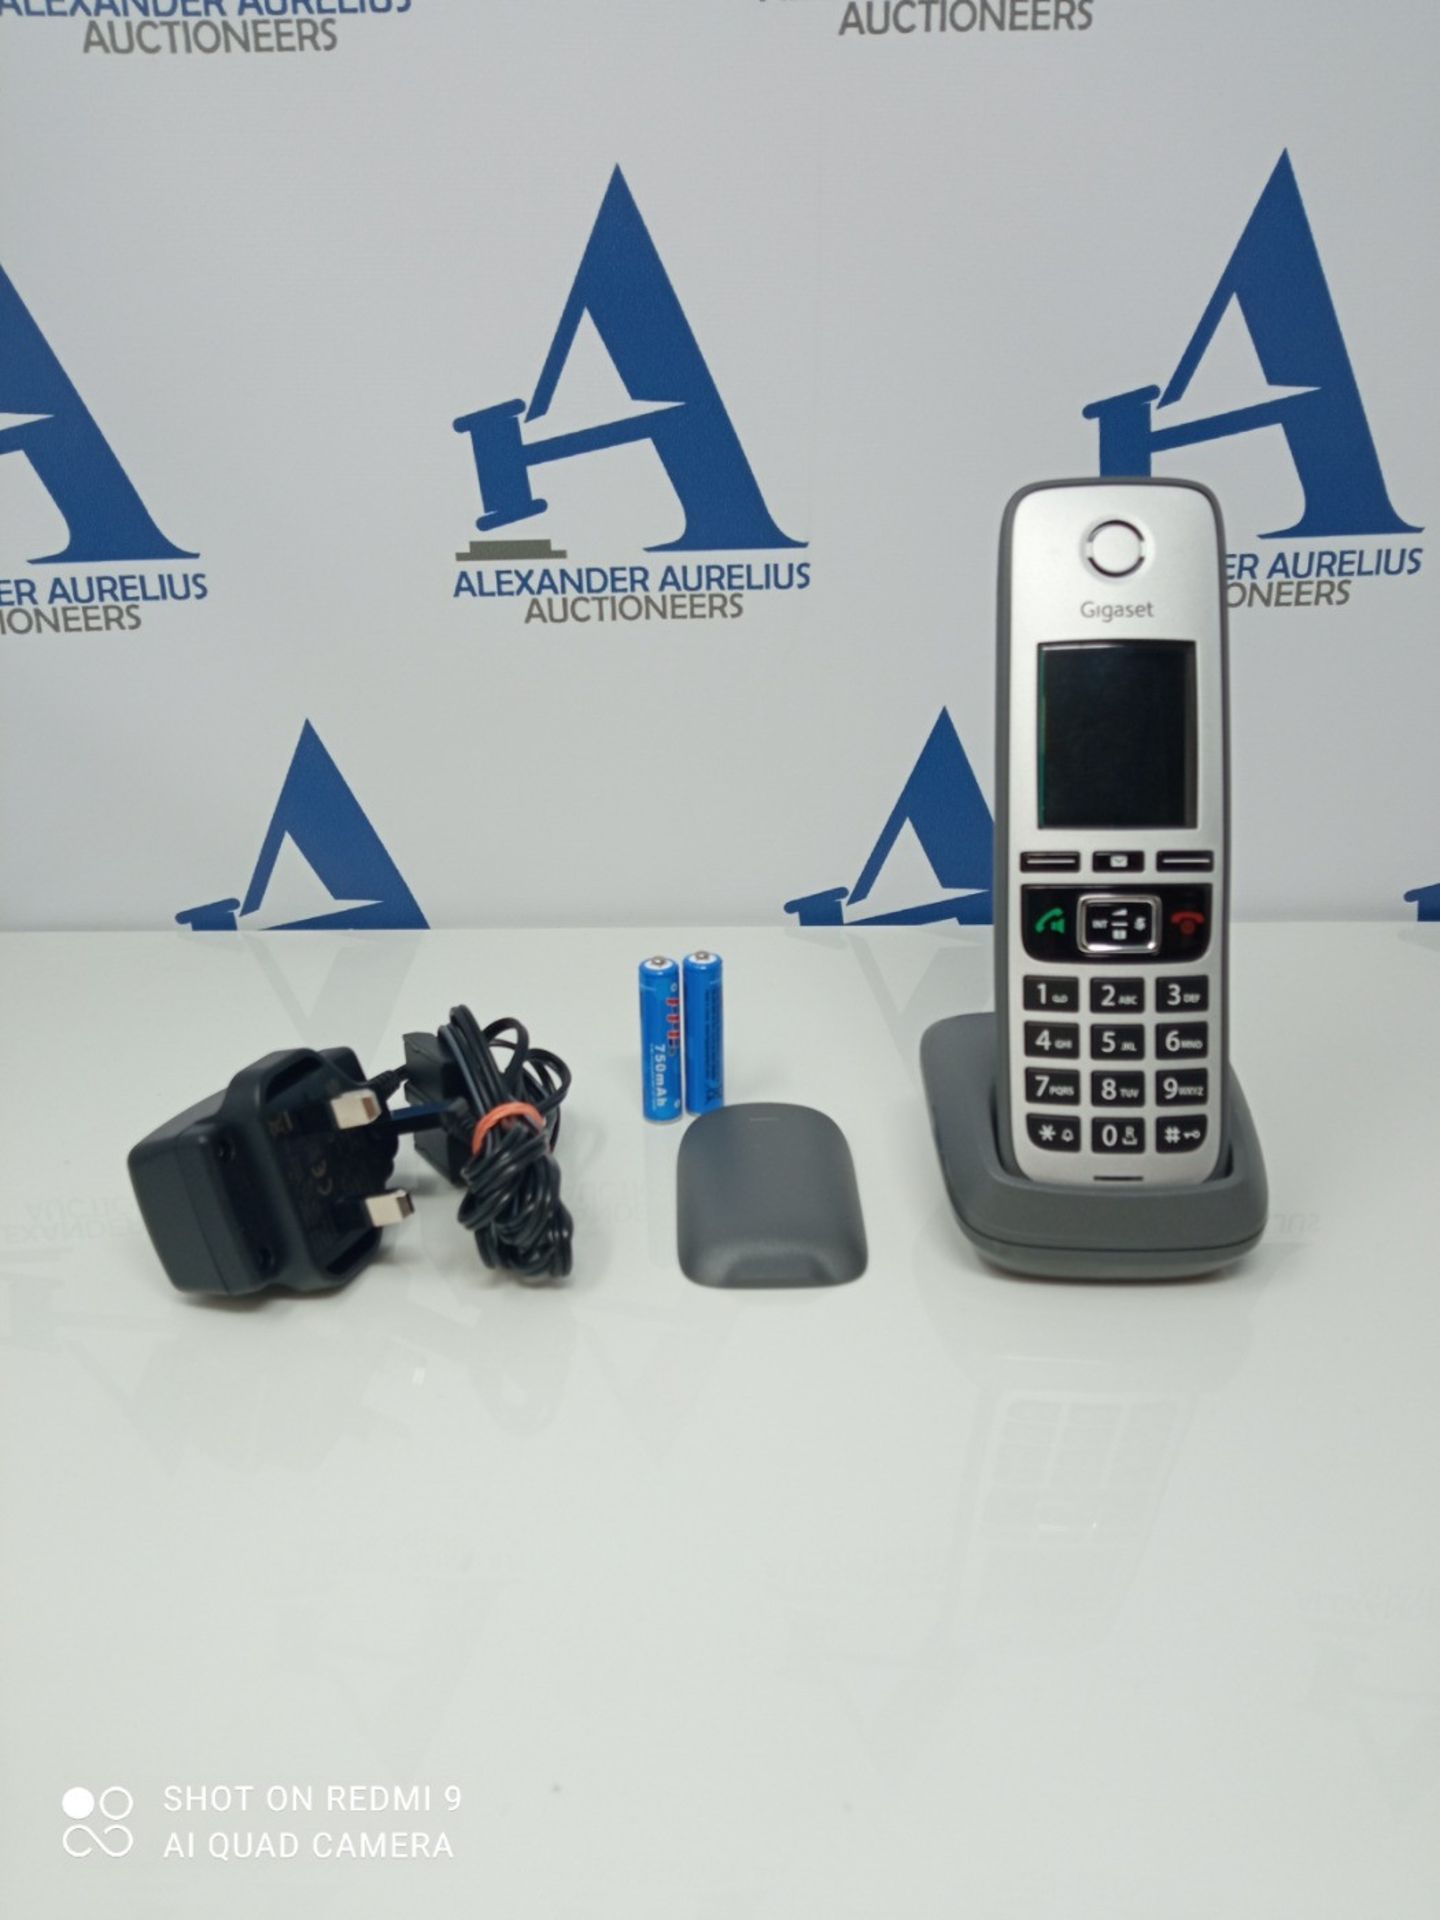 Gigaset Family HX - additional handset for Gigaset Family cordless home telephone syst - Image 3 of 3